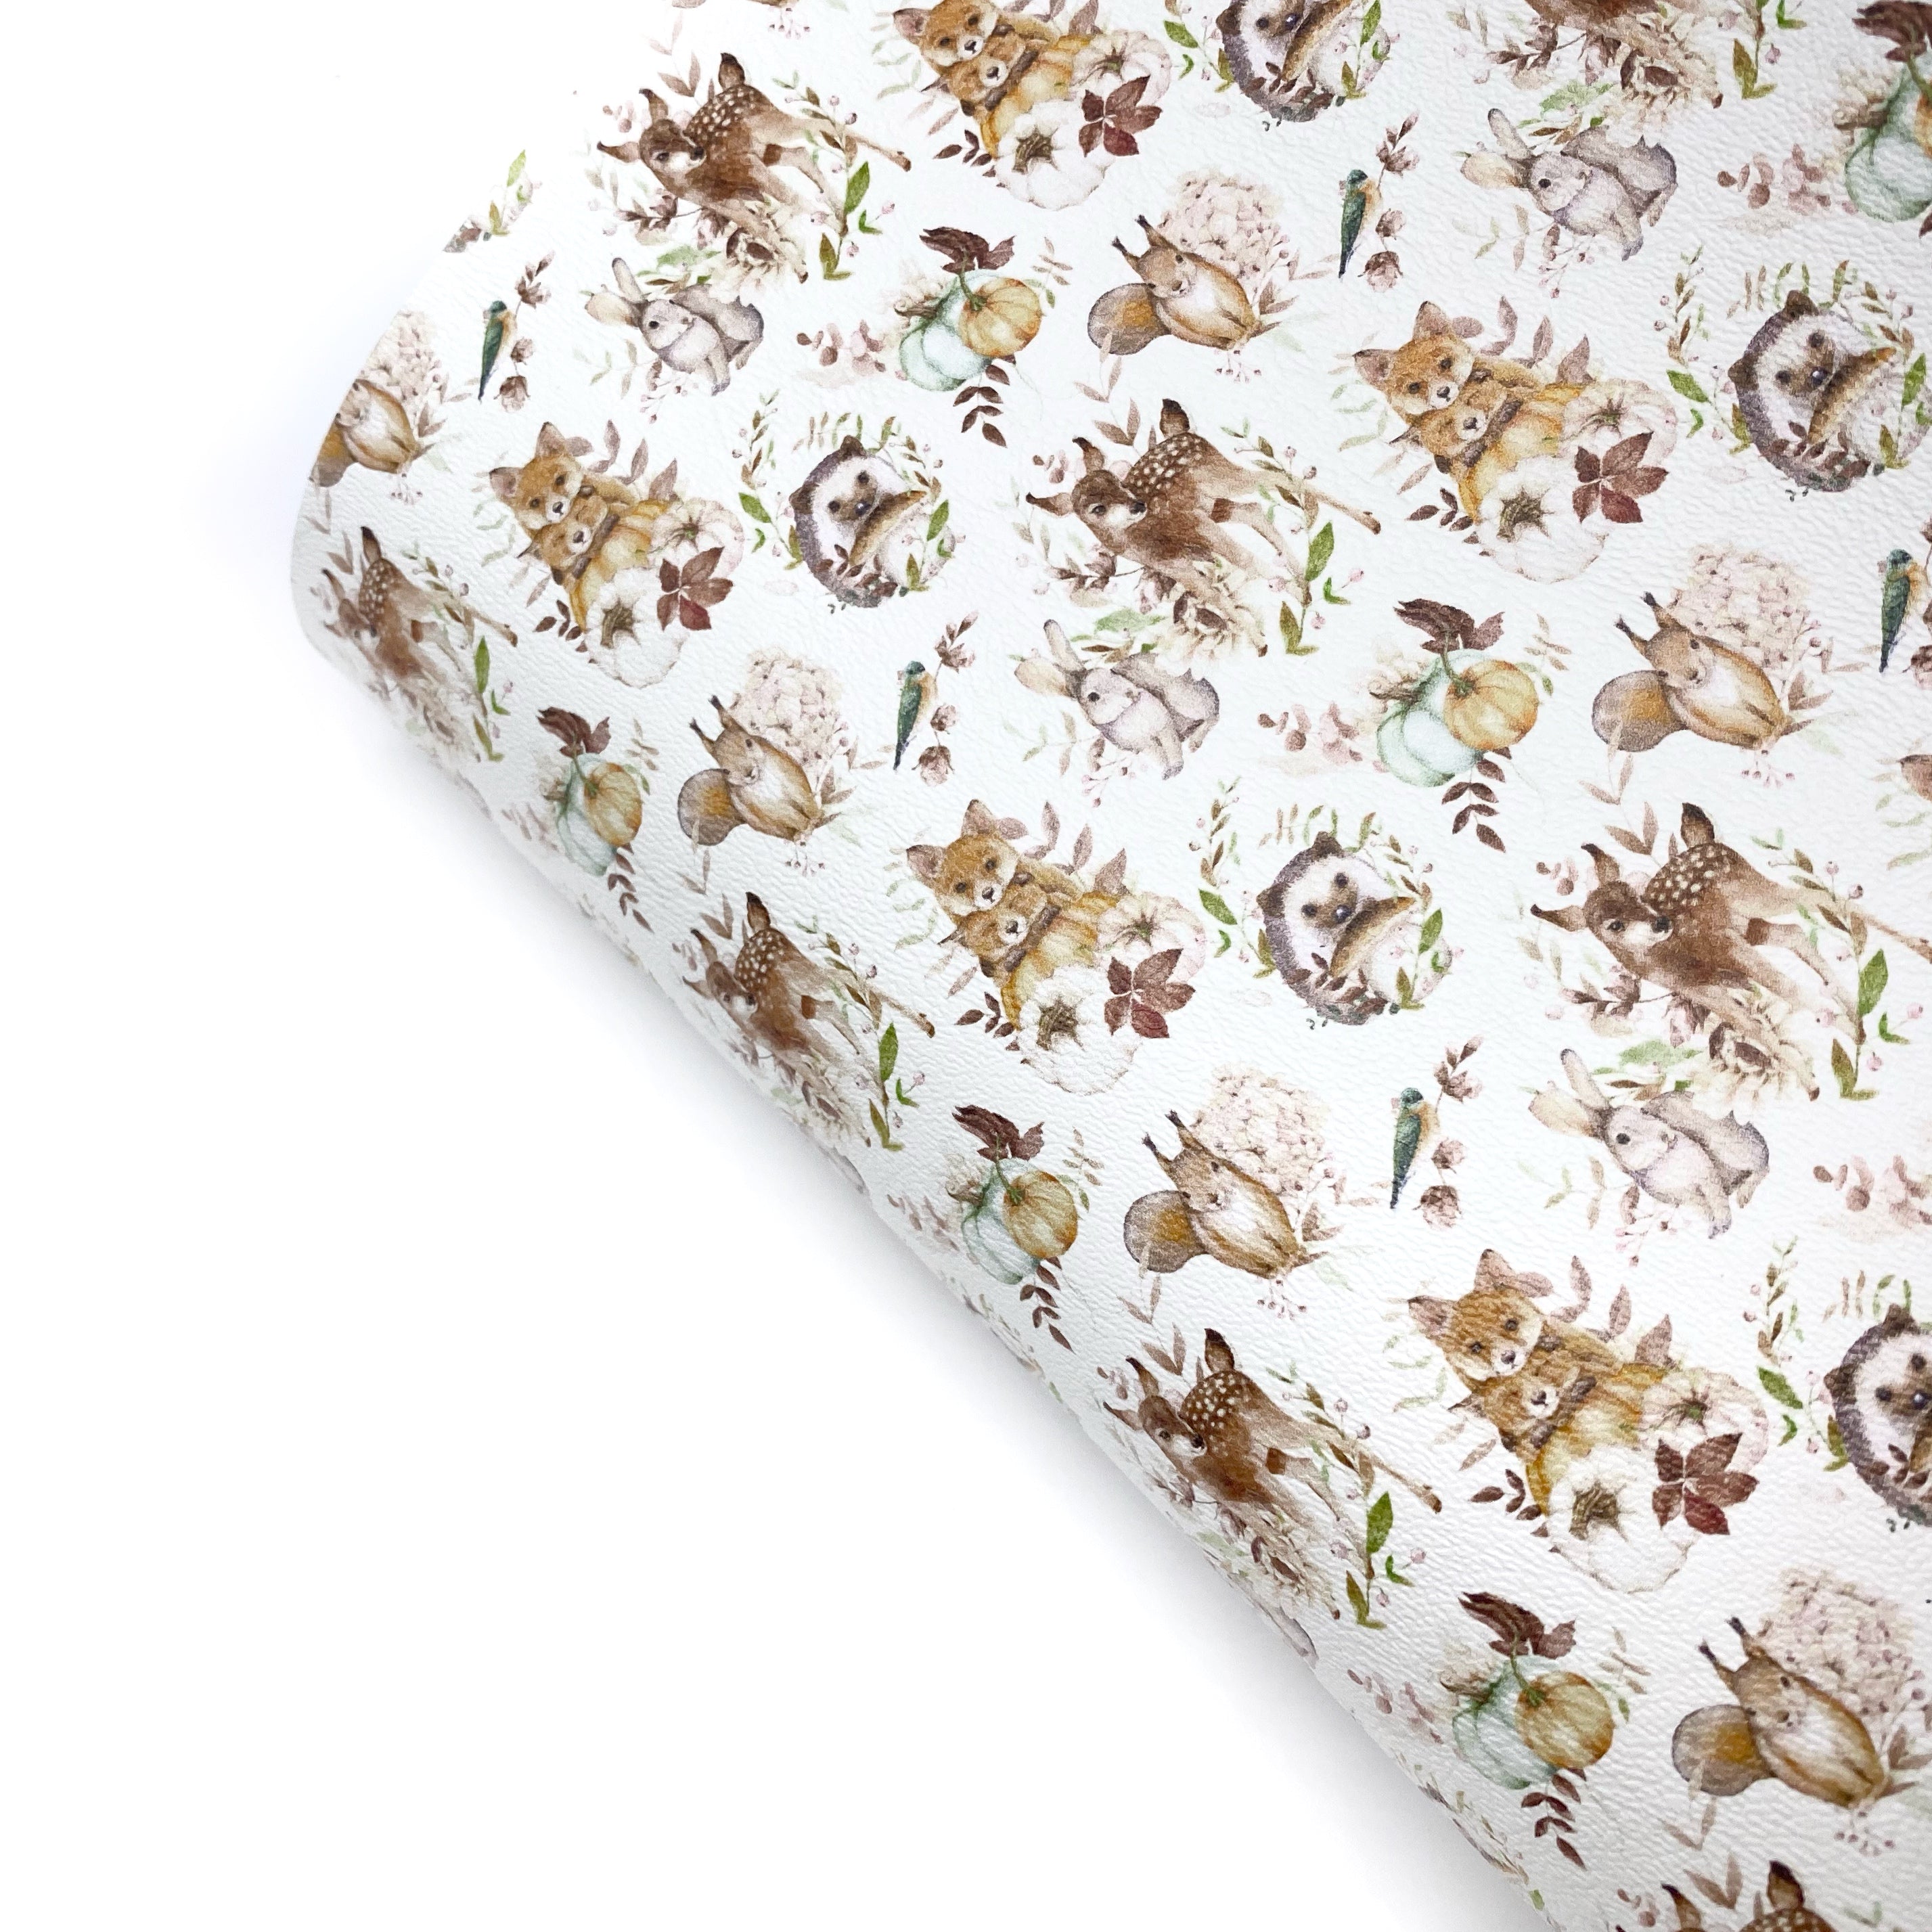 Woodland Friends Premium Faux Leather Fabric Sheets